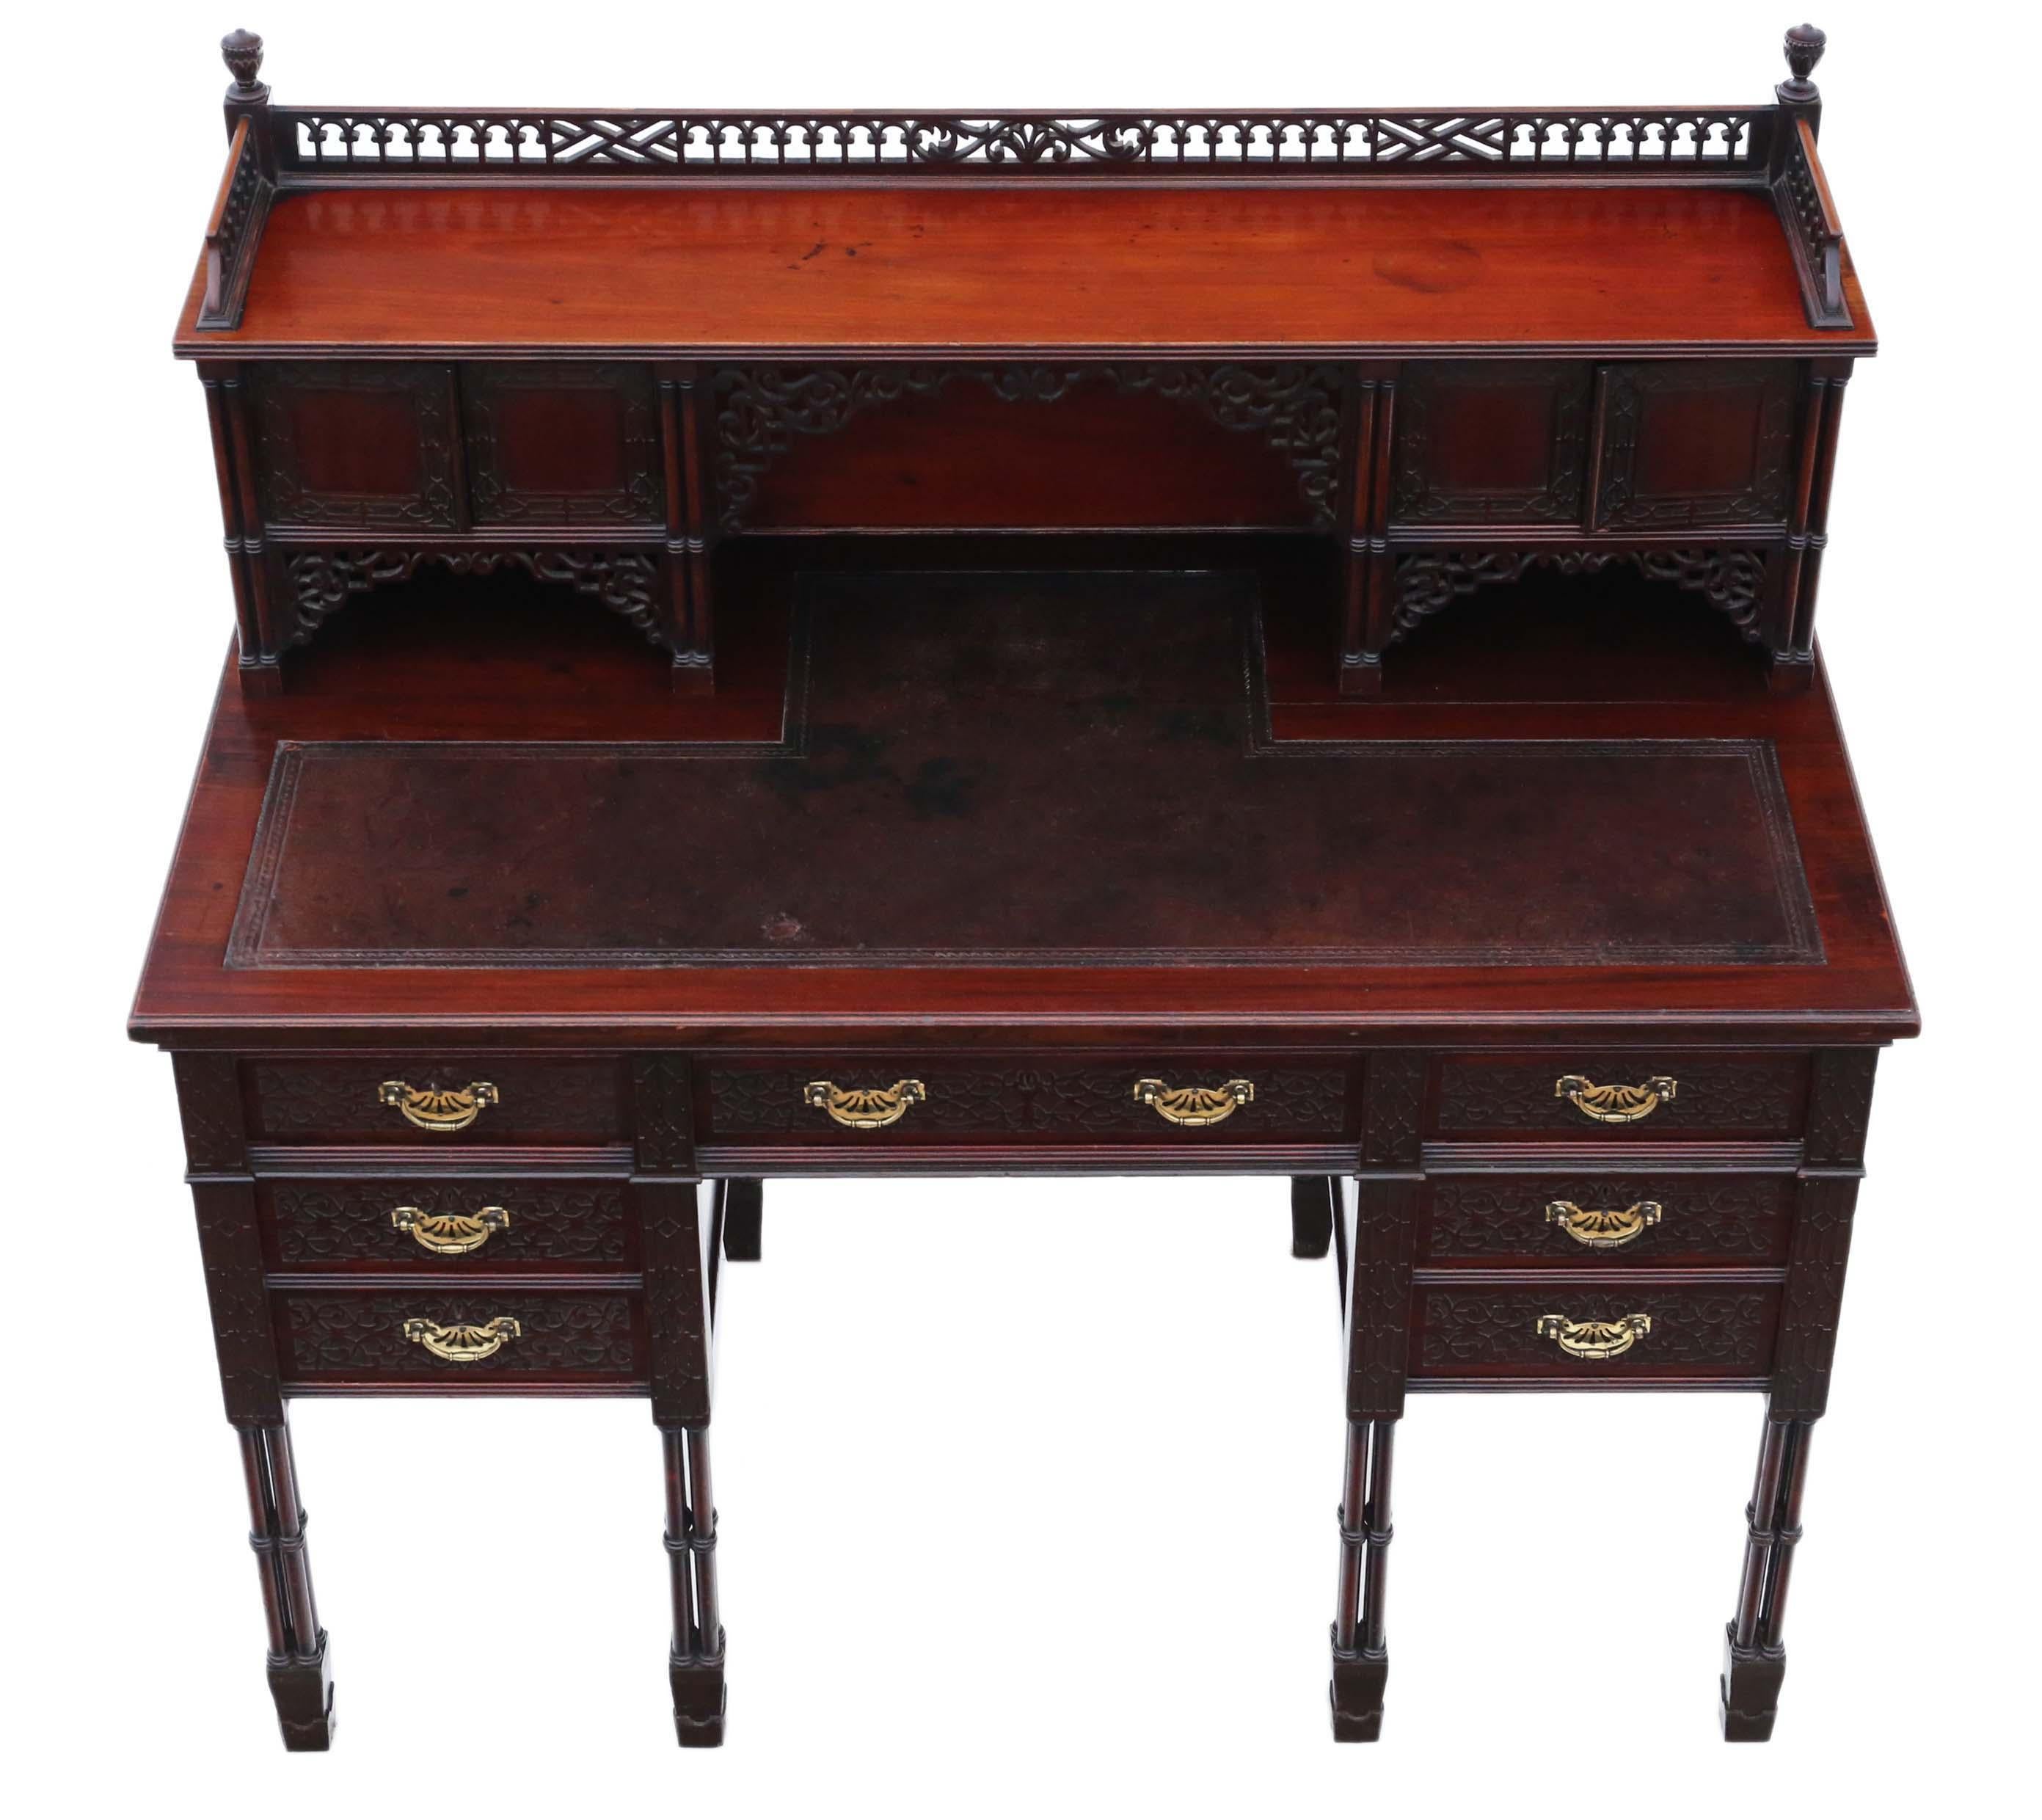 Antique fine quality Victorian mahogany twin pedestal desk Edwards & Roberts (famous London maker), circa 1895.

This is a lovely quality piece, that is full of age, charm and character. Original patinated leather top.

Profuse intricate blind